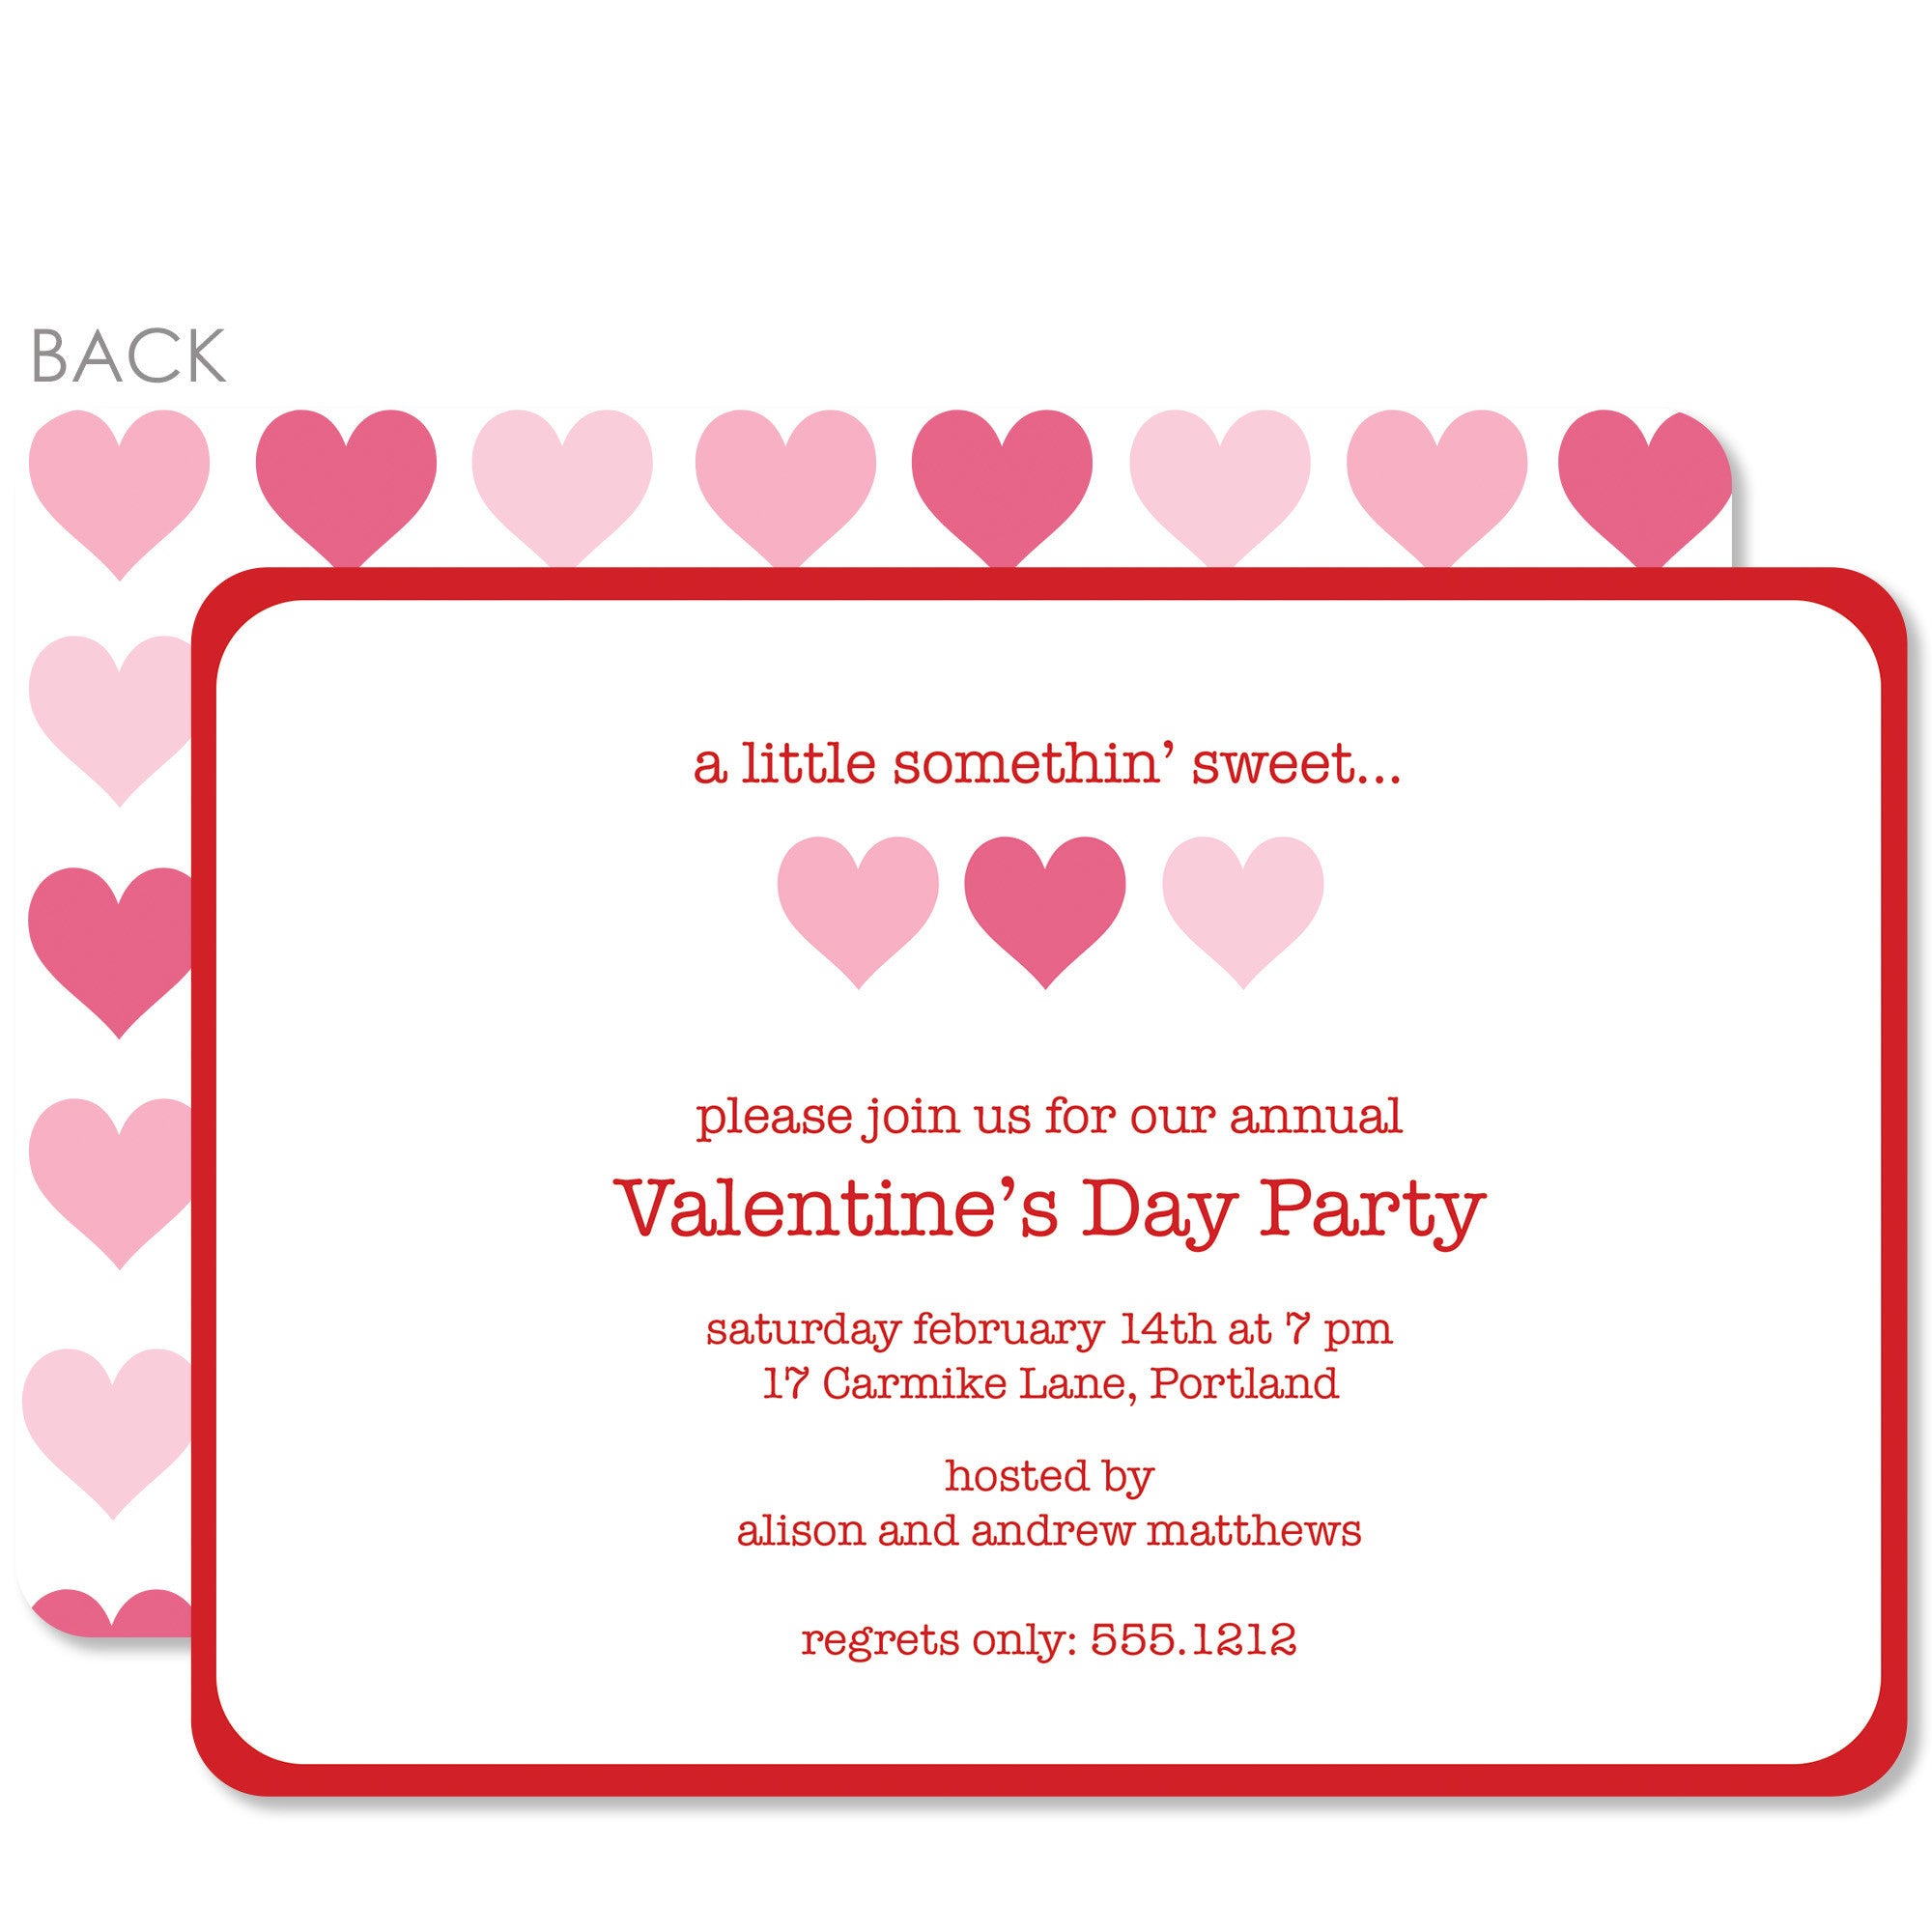 Valentine's Day Invitation, Printed on Heavy Cardstock, Design with 3 simple hearts, Pipsy.com